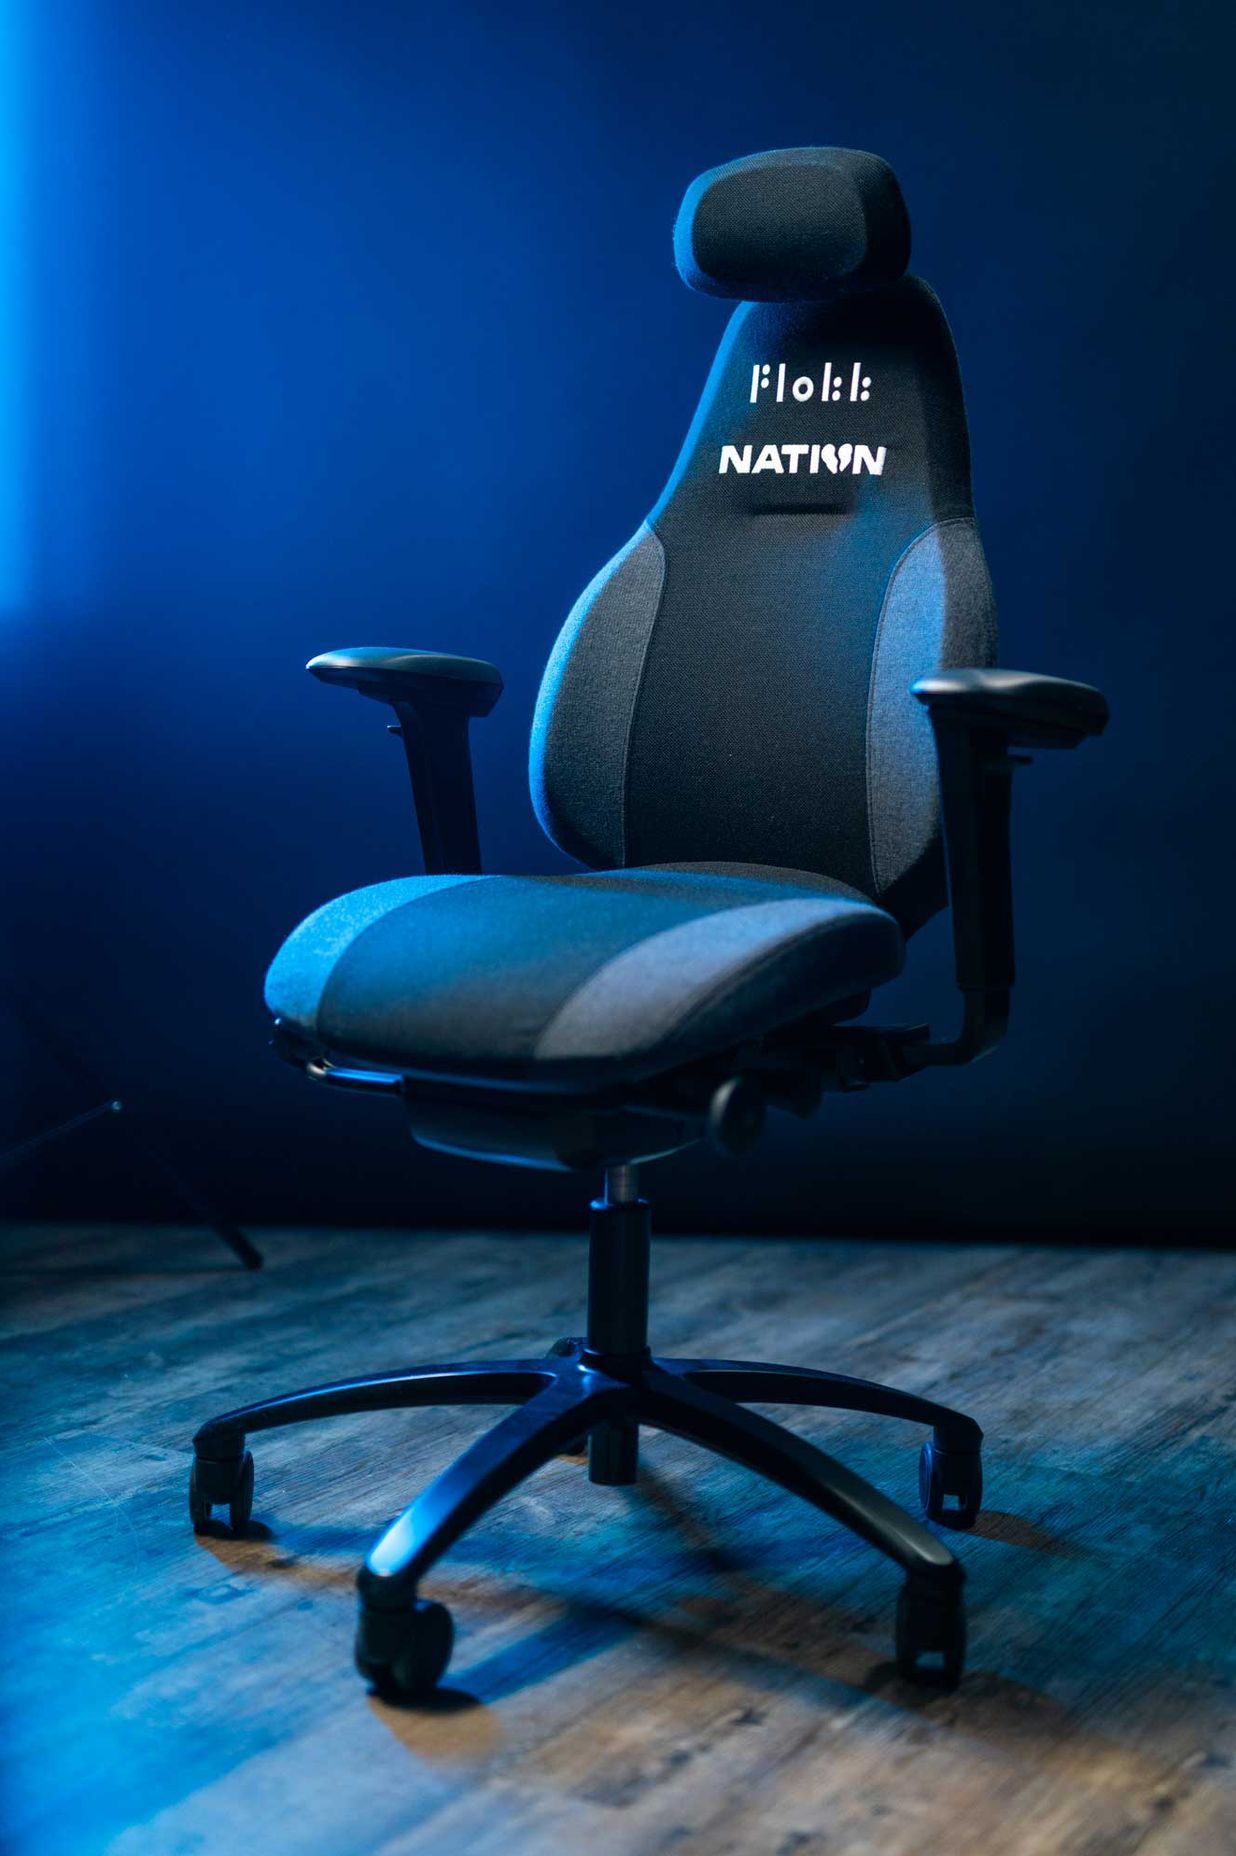 The RH Mereo is all about maximum performance combined with easy-to-use controls, making it the perfect gaming chair for shared gaming environments.